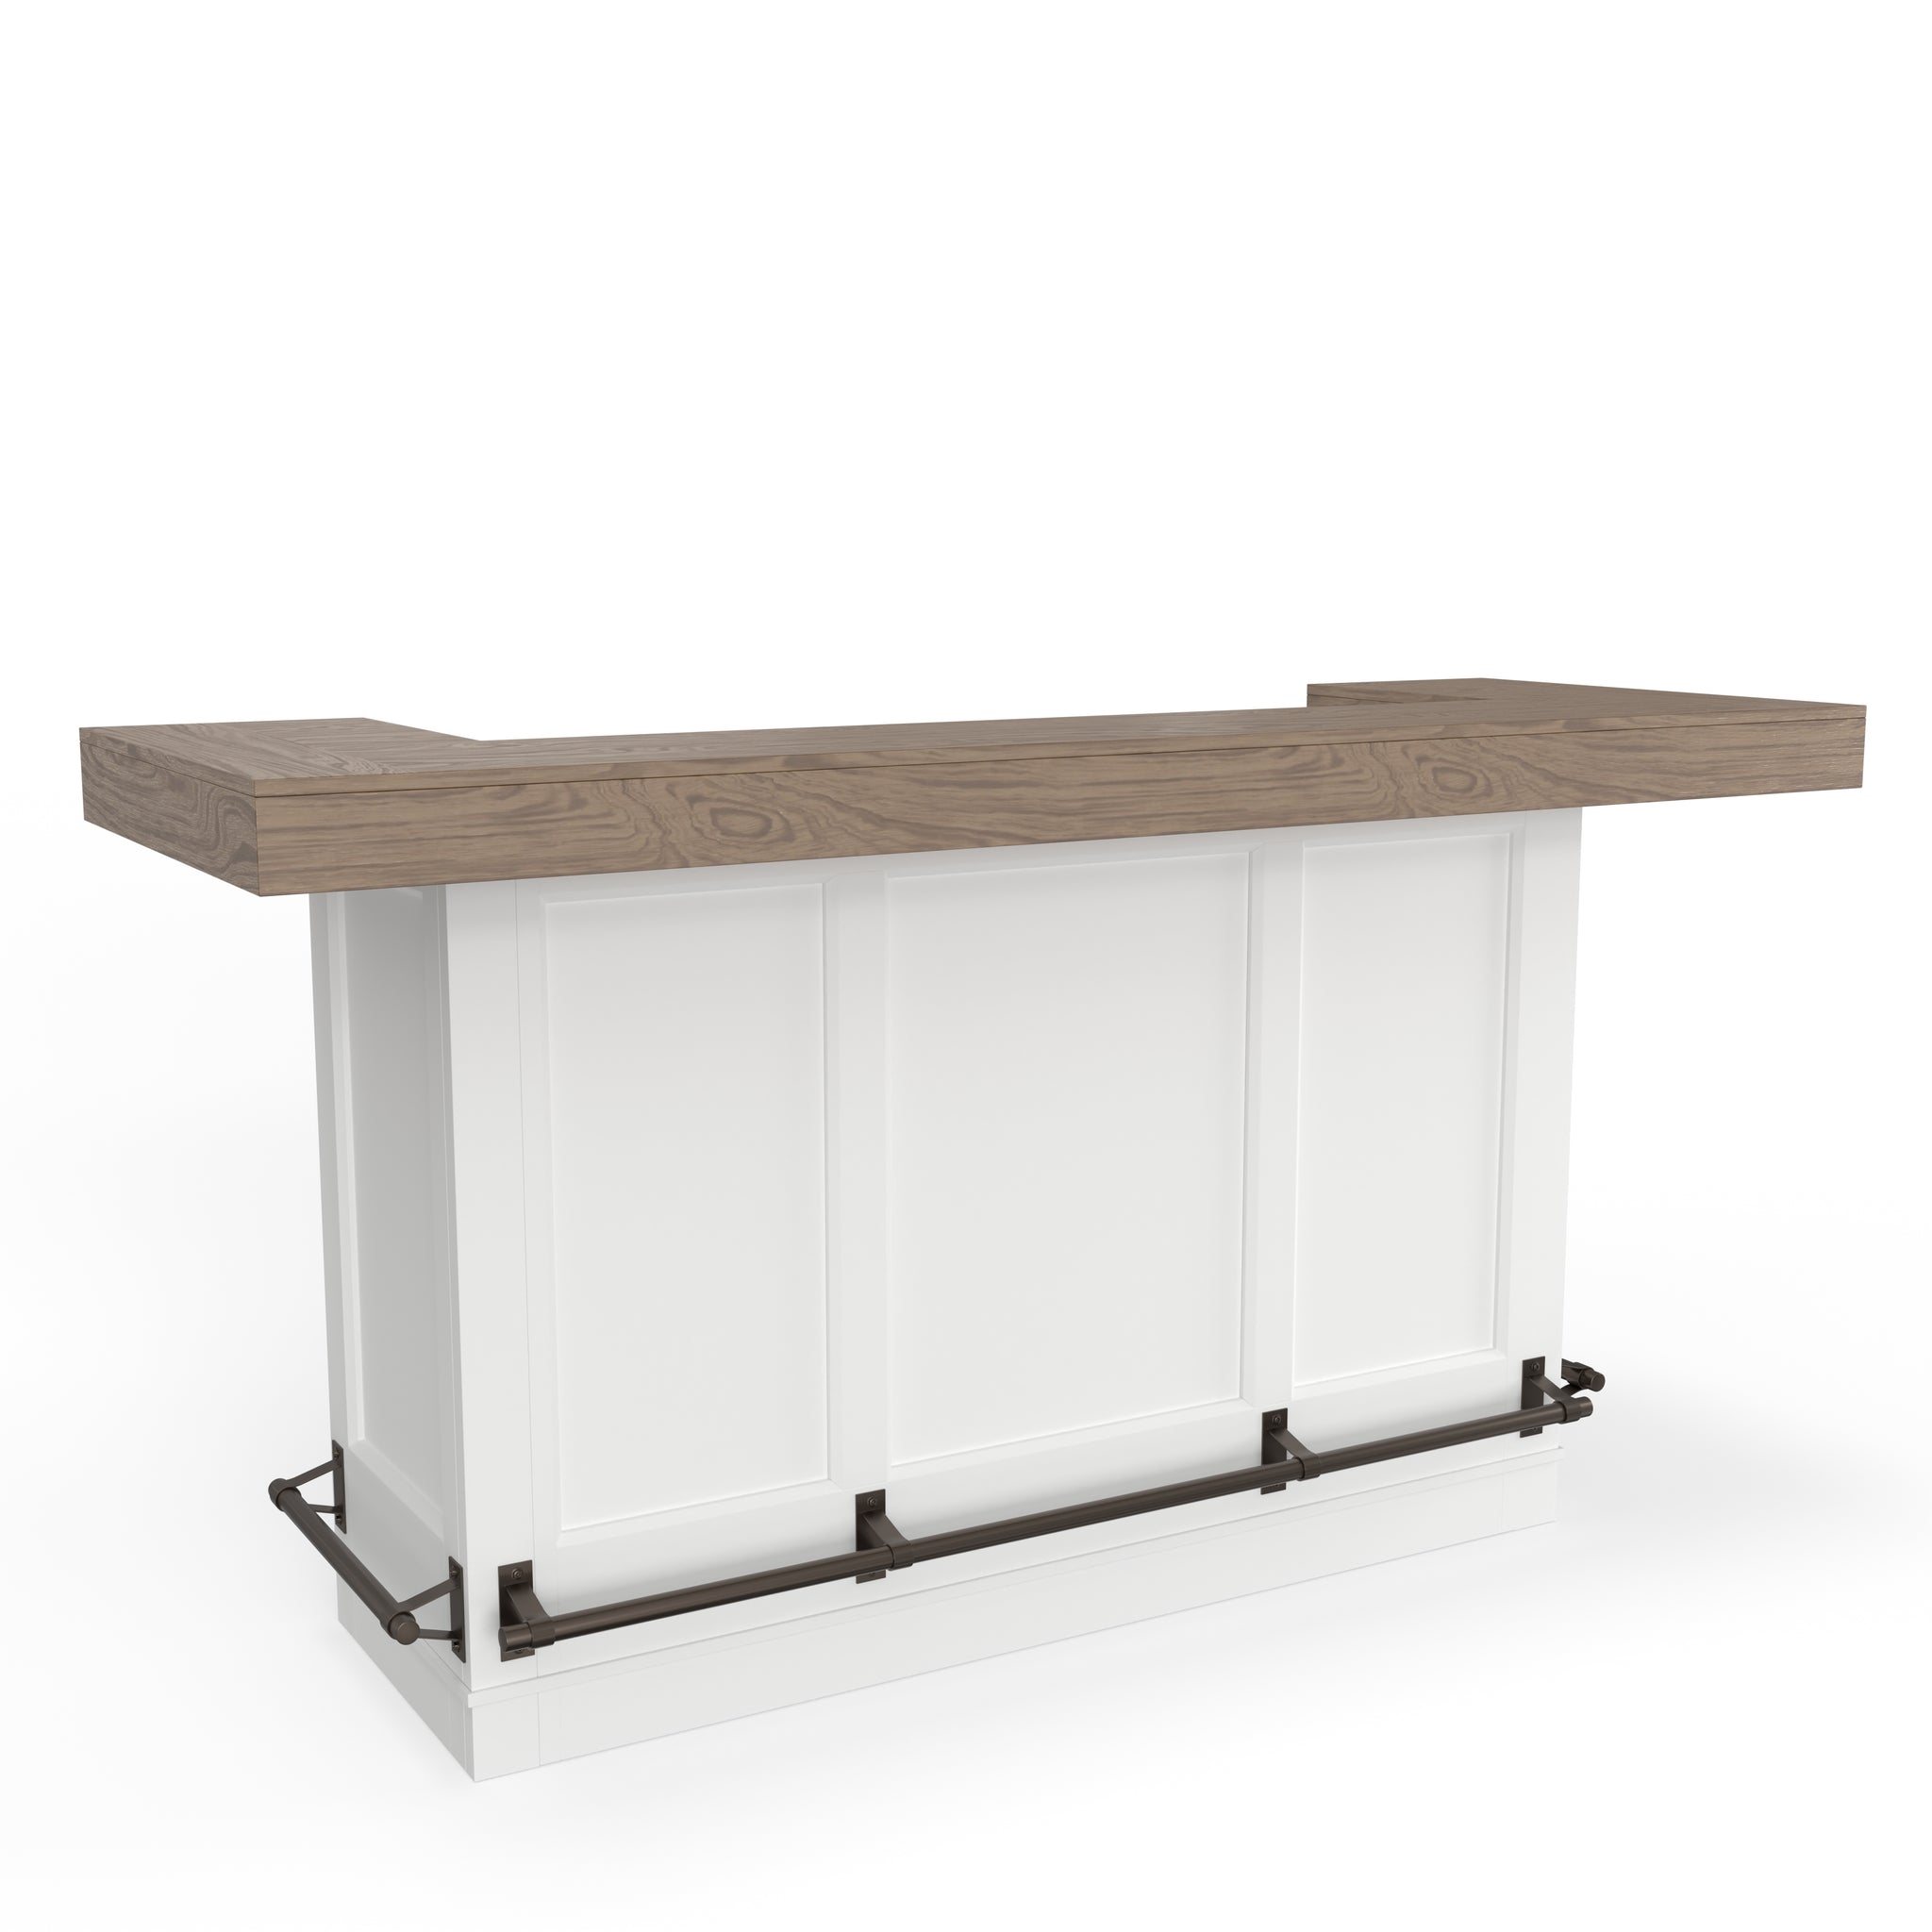 AMERICANA MODERN with Bar - 78 Furniture House Complete quartz in. DINING Parker